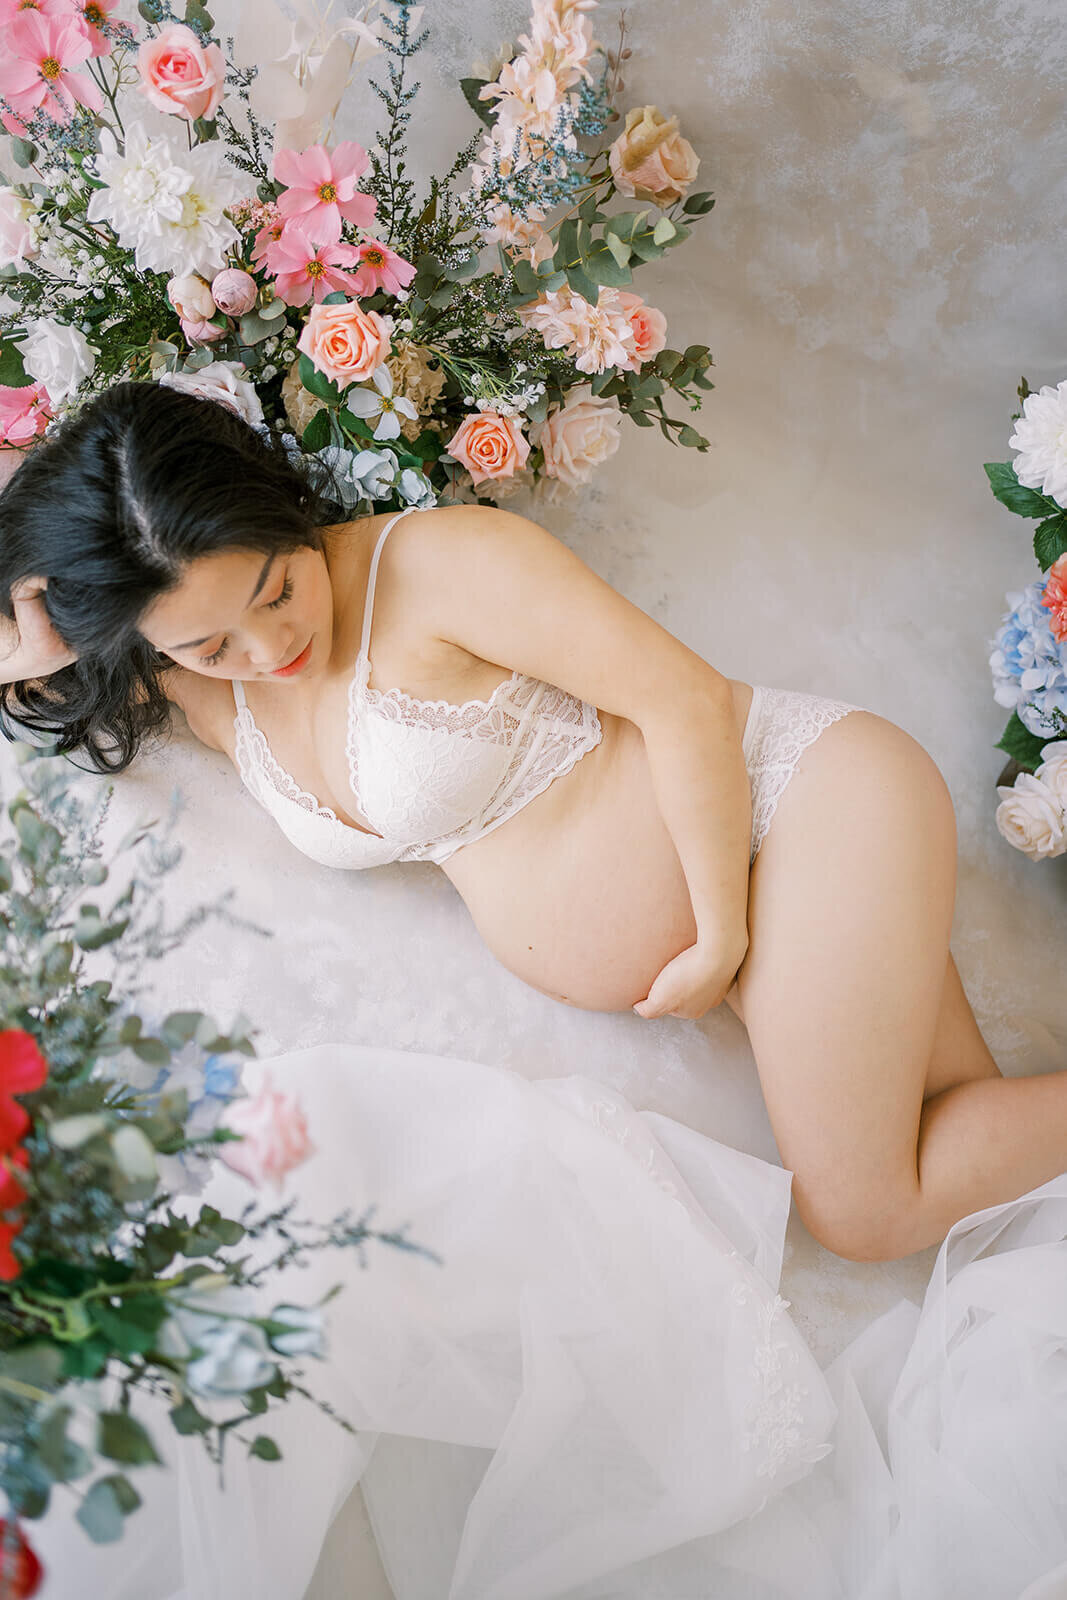 Capture the elegance of maternity with a mum adorned in a stunning maternity gown at Gold Coast's Kwila Lodge